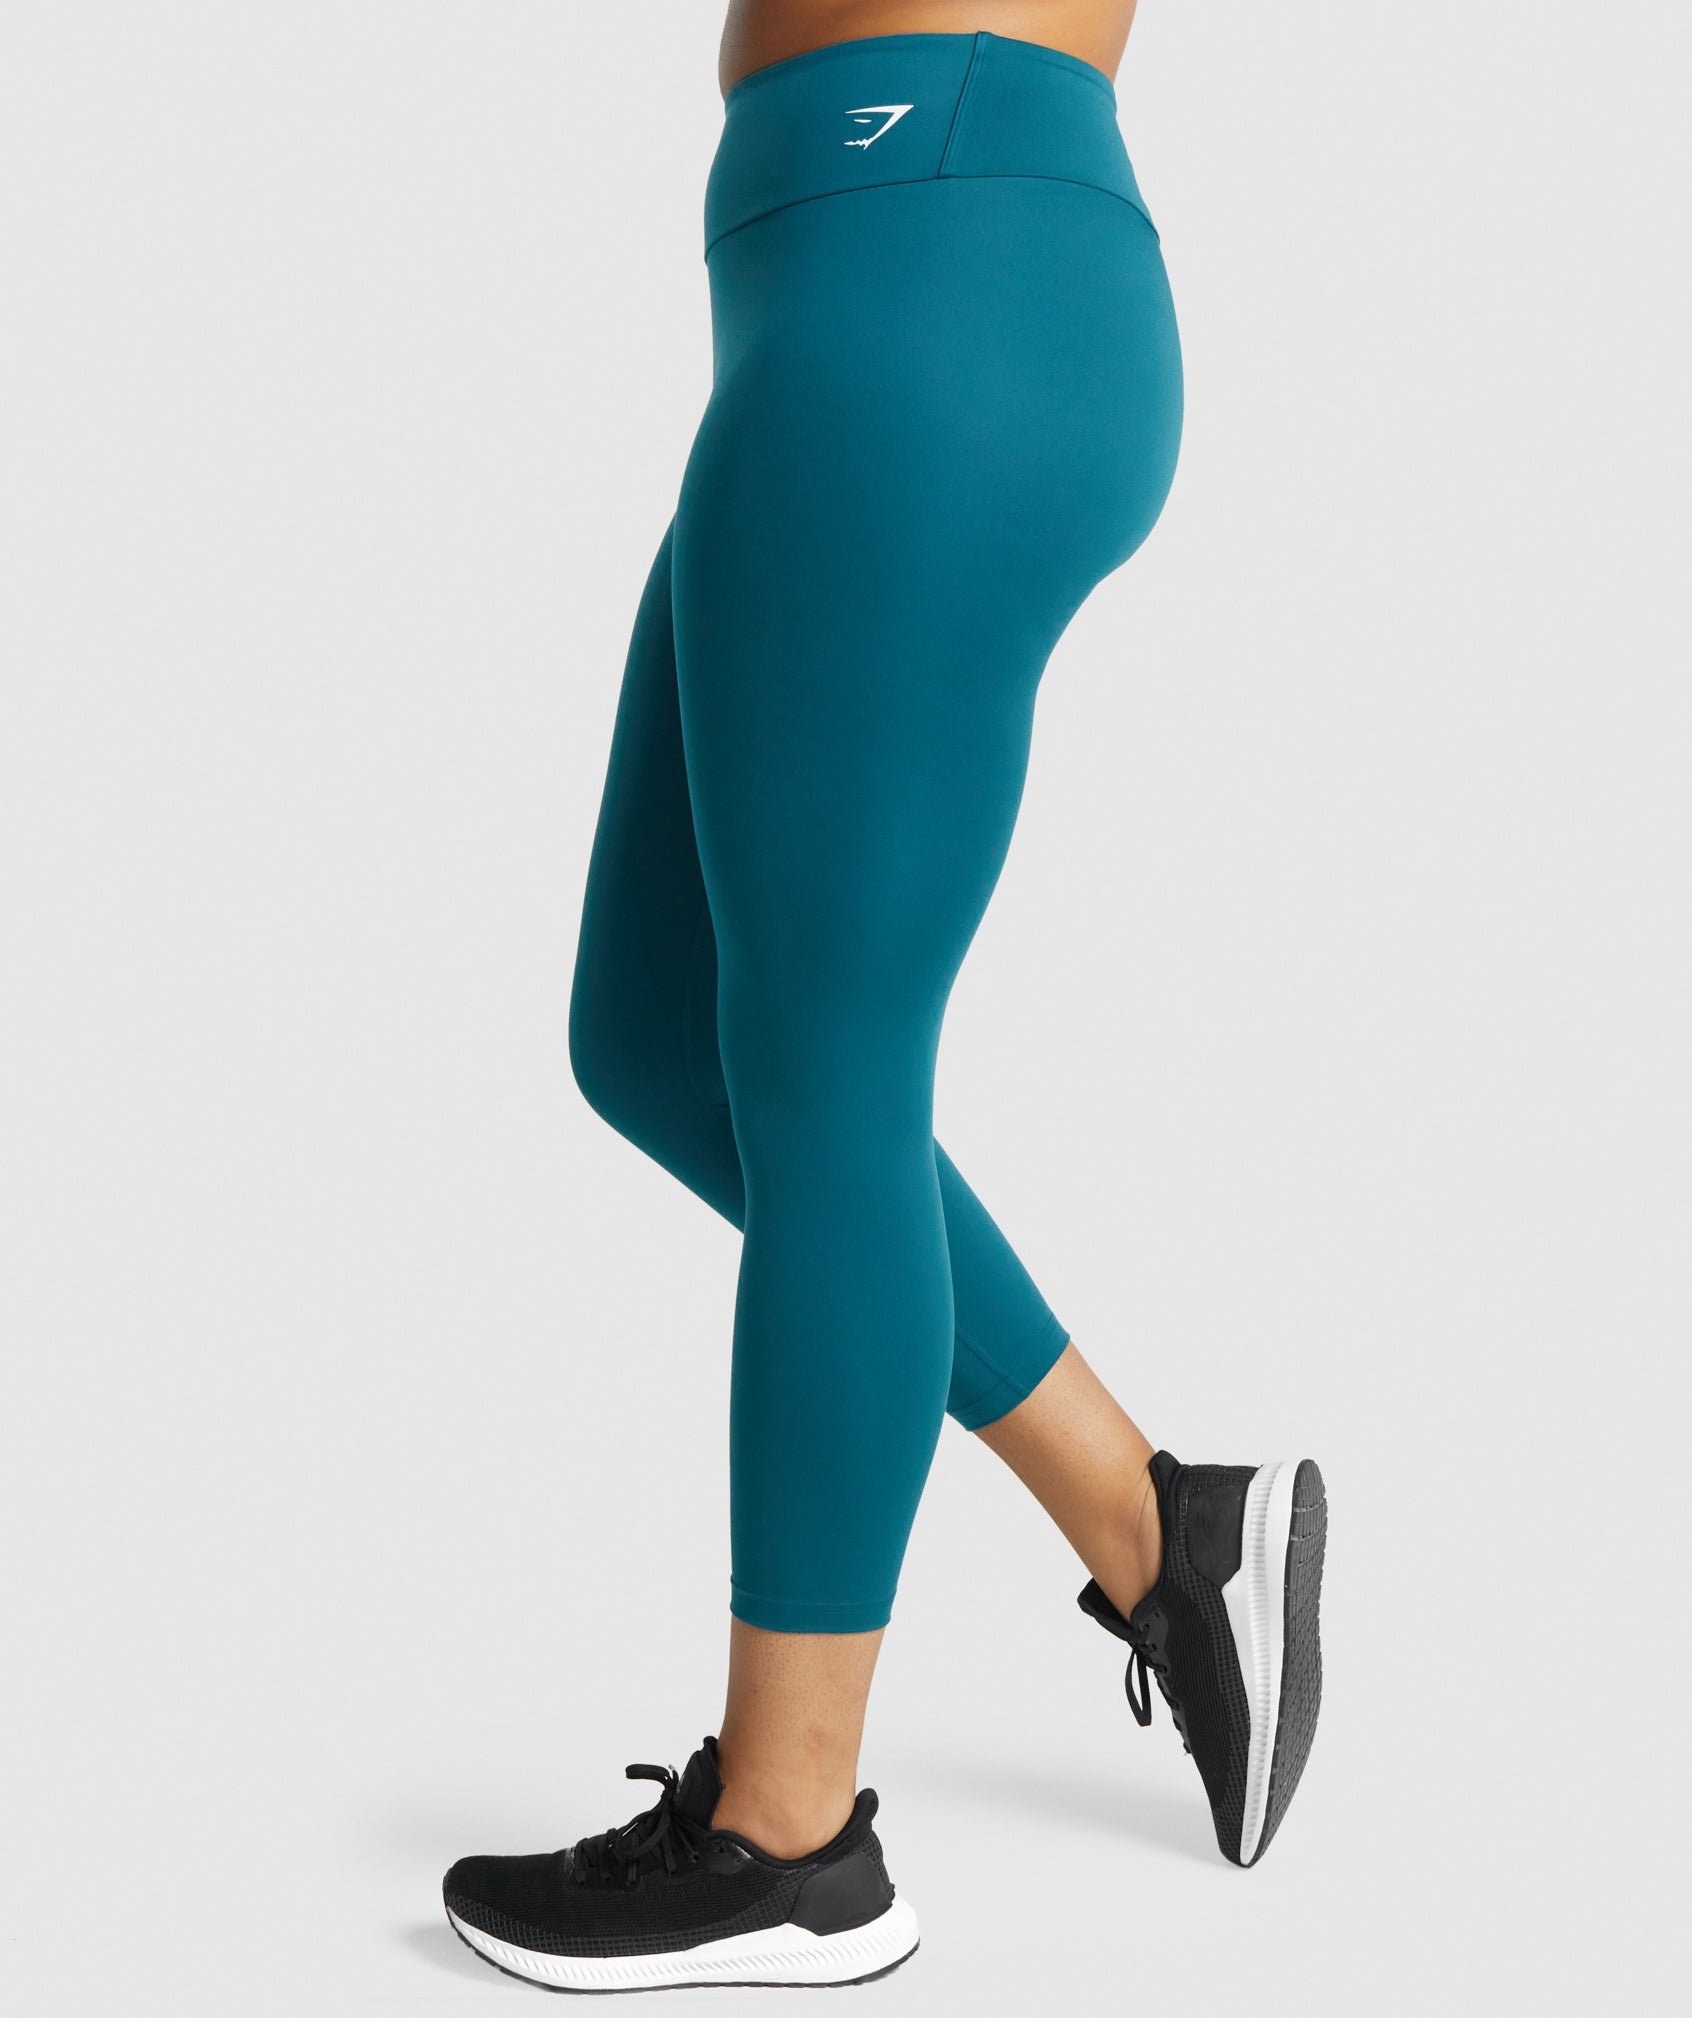 BYYLECL Intensify Workout Leggings for Women,Leggings Sports Yoga Pants  with Pockets High Waist Tummys Control,Slim-Fit Abrasion Resistant Pants  Aurora Bright Blue : : Fashion